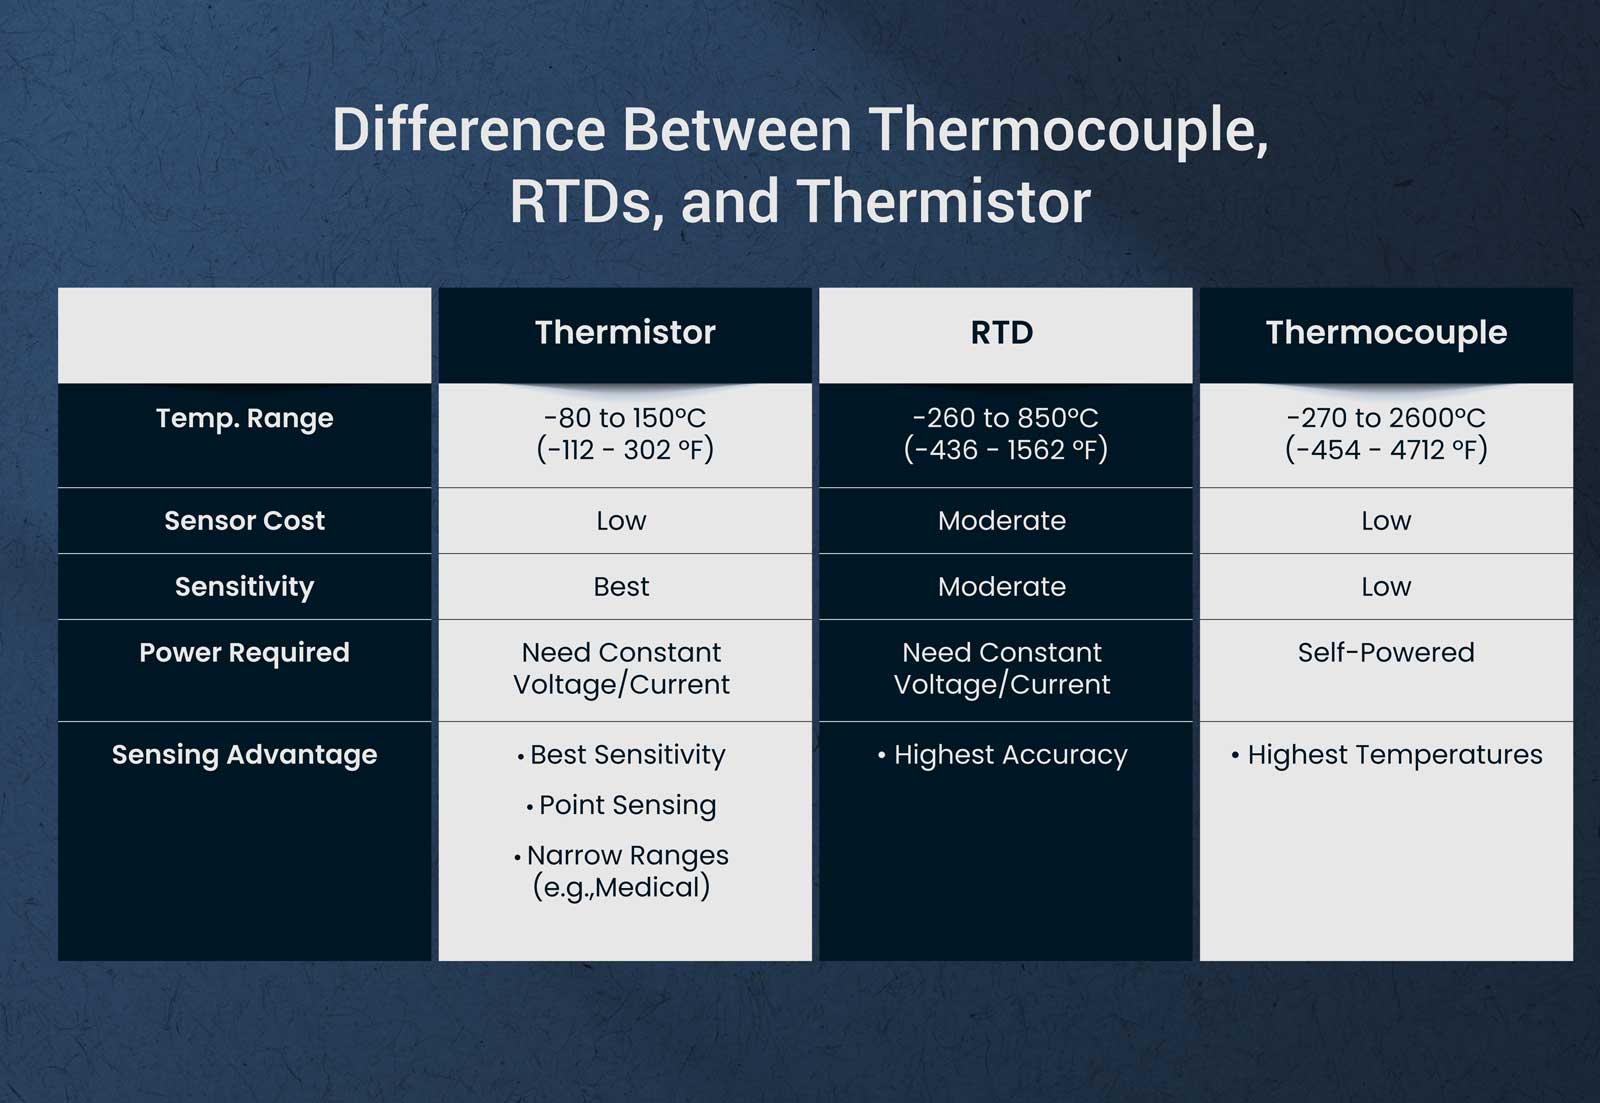 Table A: Difference between Thermocouple, RTDs, and Thermistors